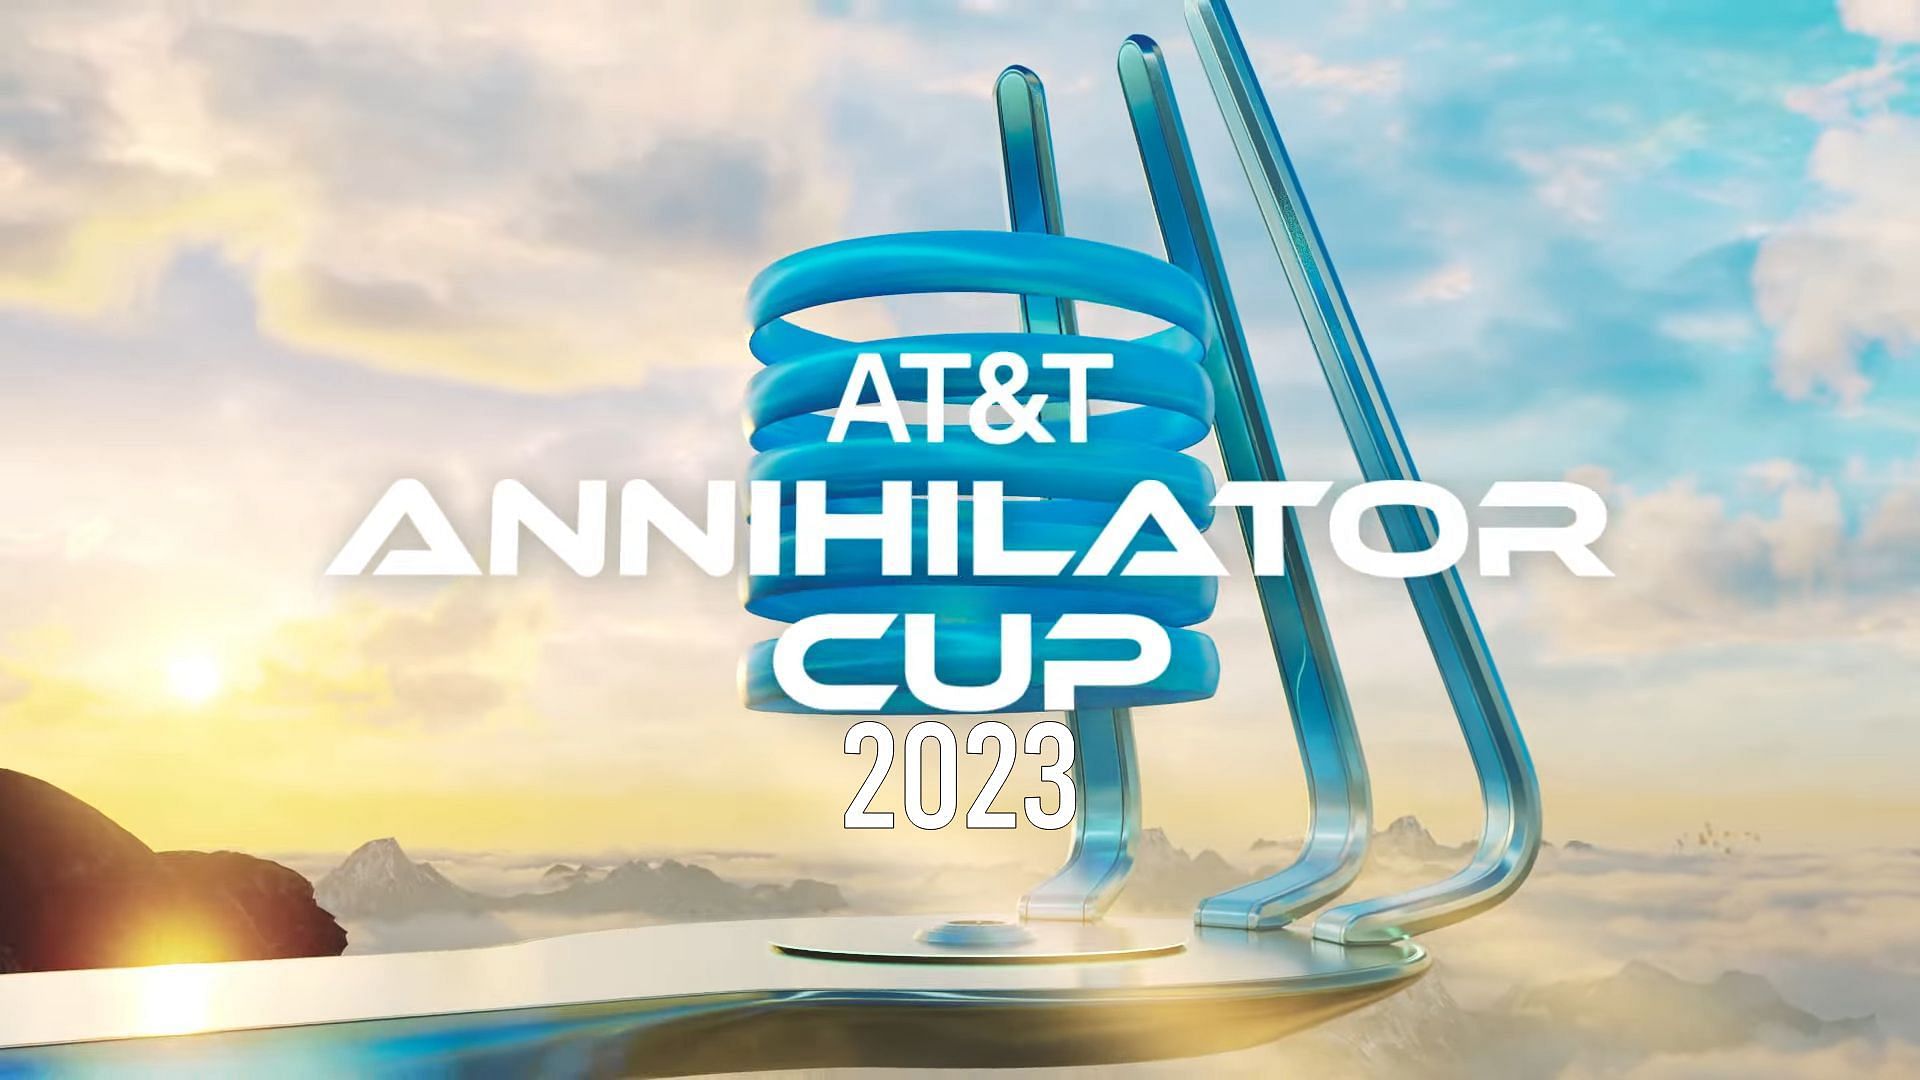 The AT&amp;T Annihilator Cup is here (Image via AT&amp;T/YouTube)